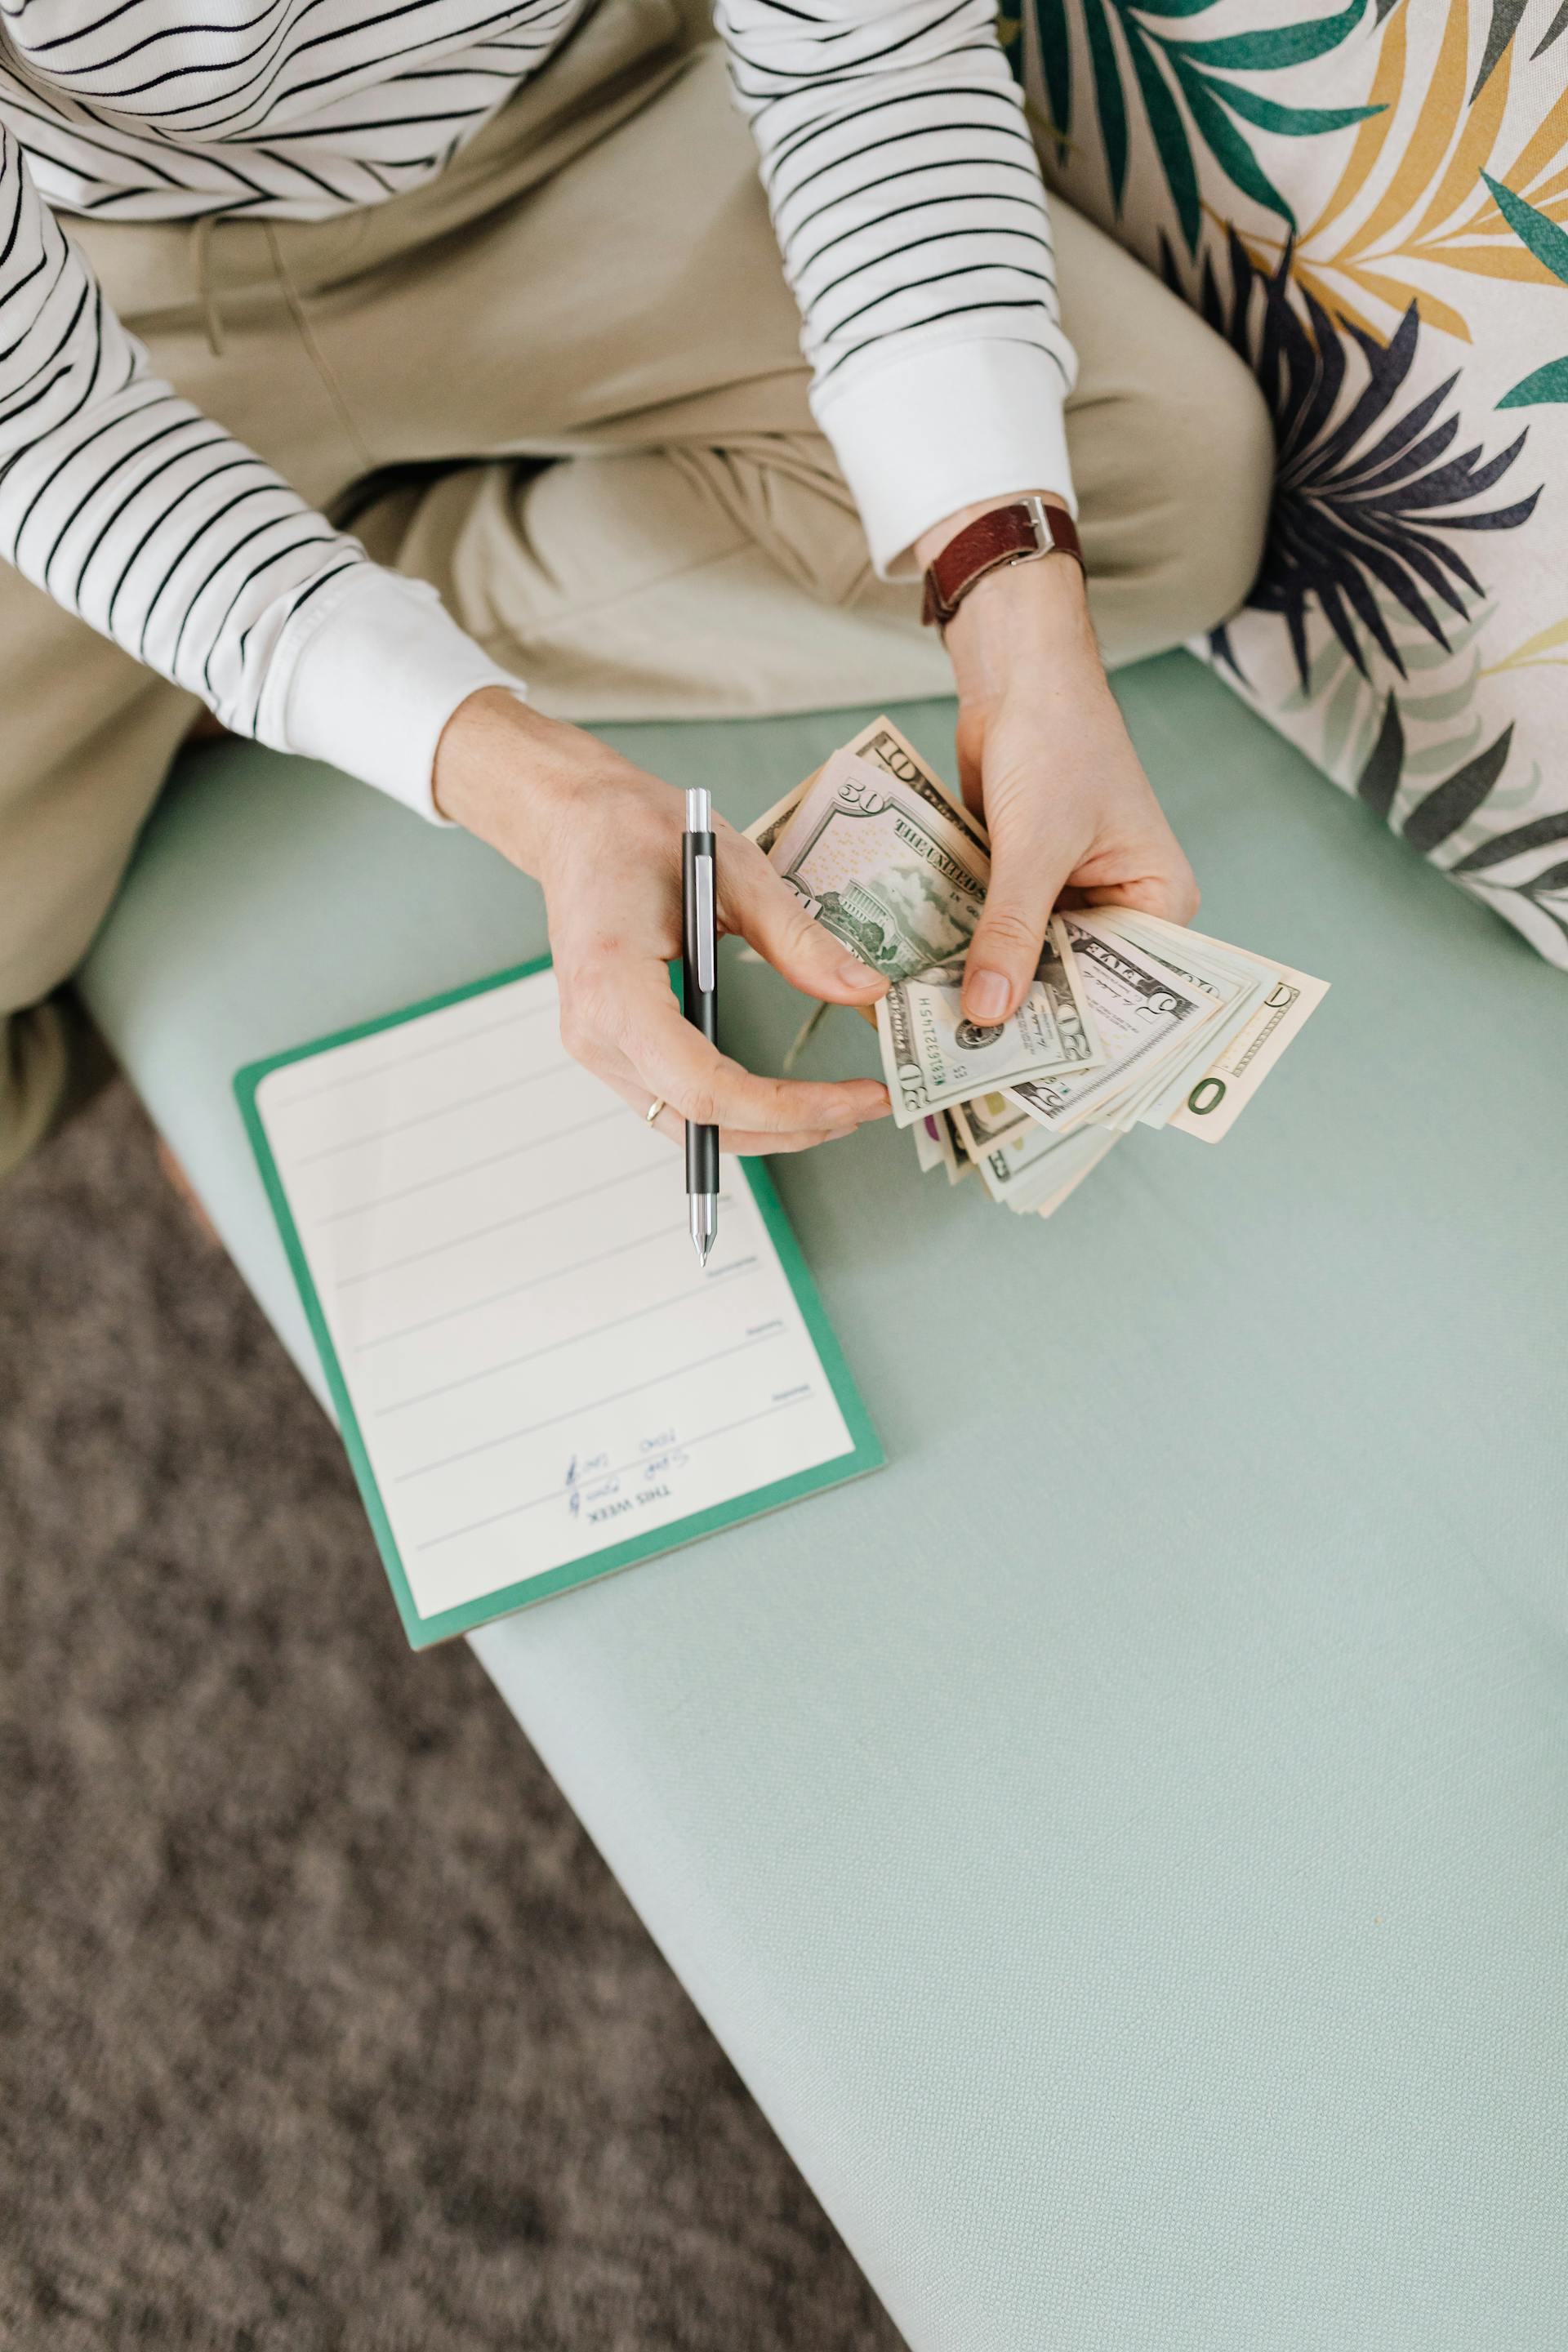 A man counting money while holding a pen | Source: Pexels